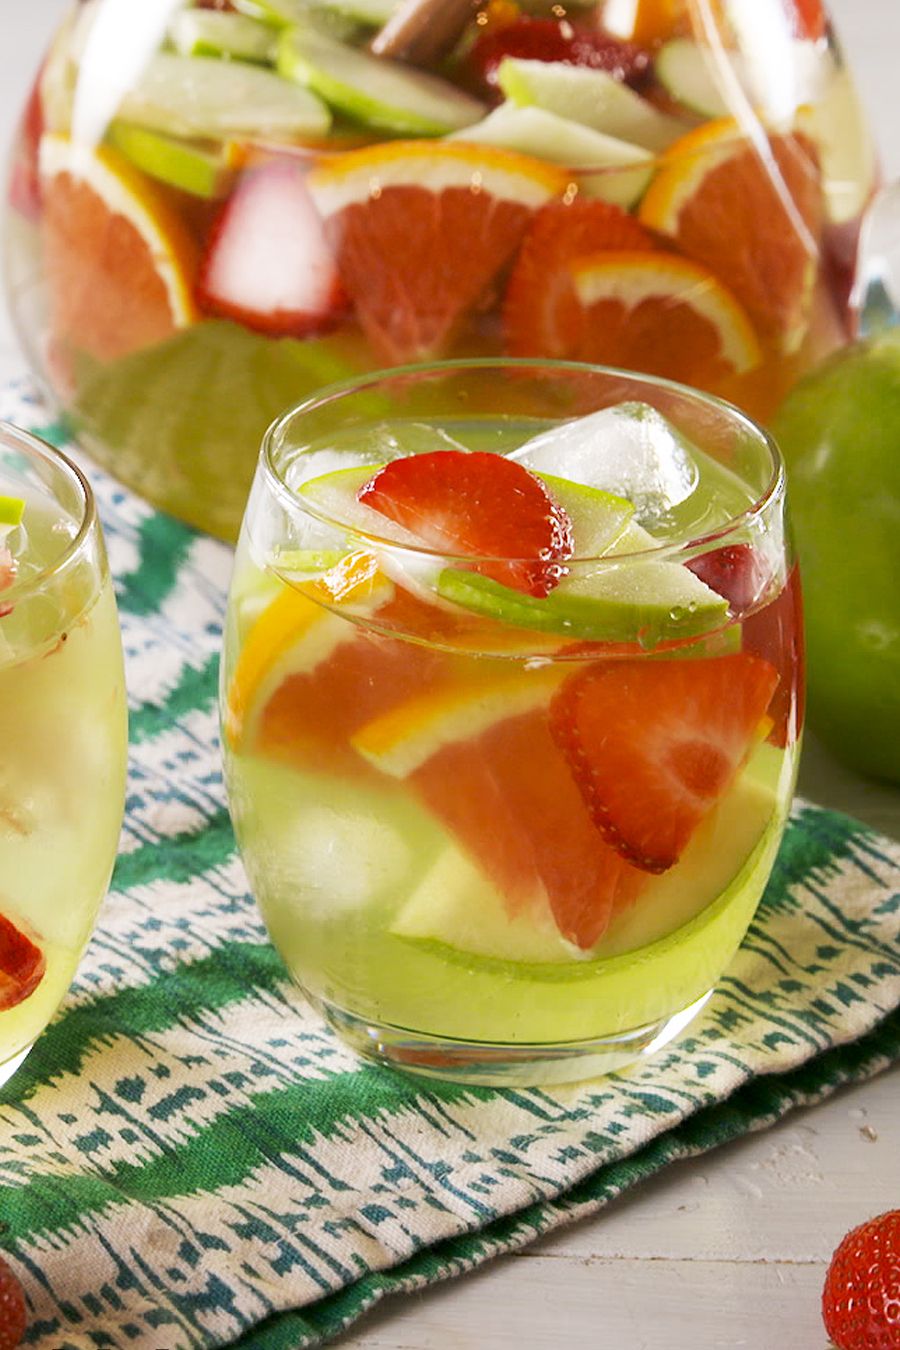 https://hips.hearstapps.com/hmg-prod/images/delish-copycat-green-apple-moscato-sangria-pin-1566407362.jpg?crop=1xw:0.9453781512605042xh;center,top&resize=980:*